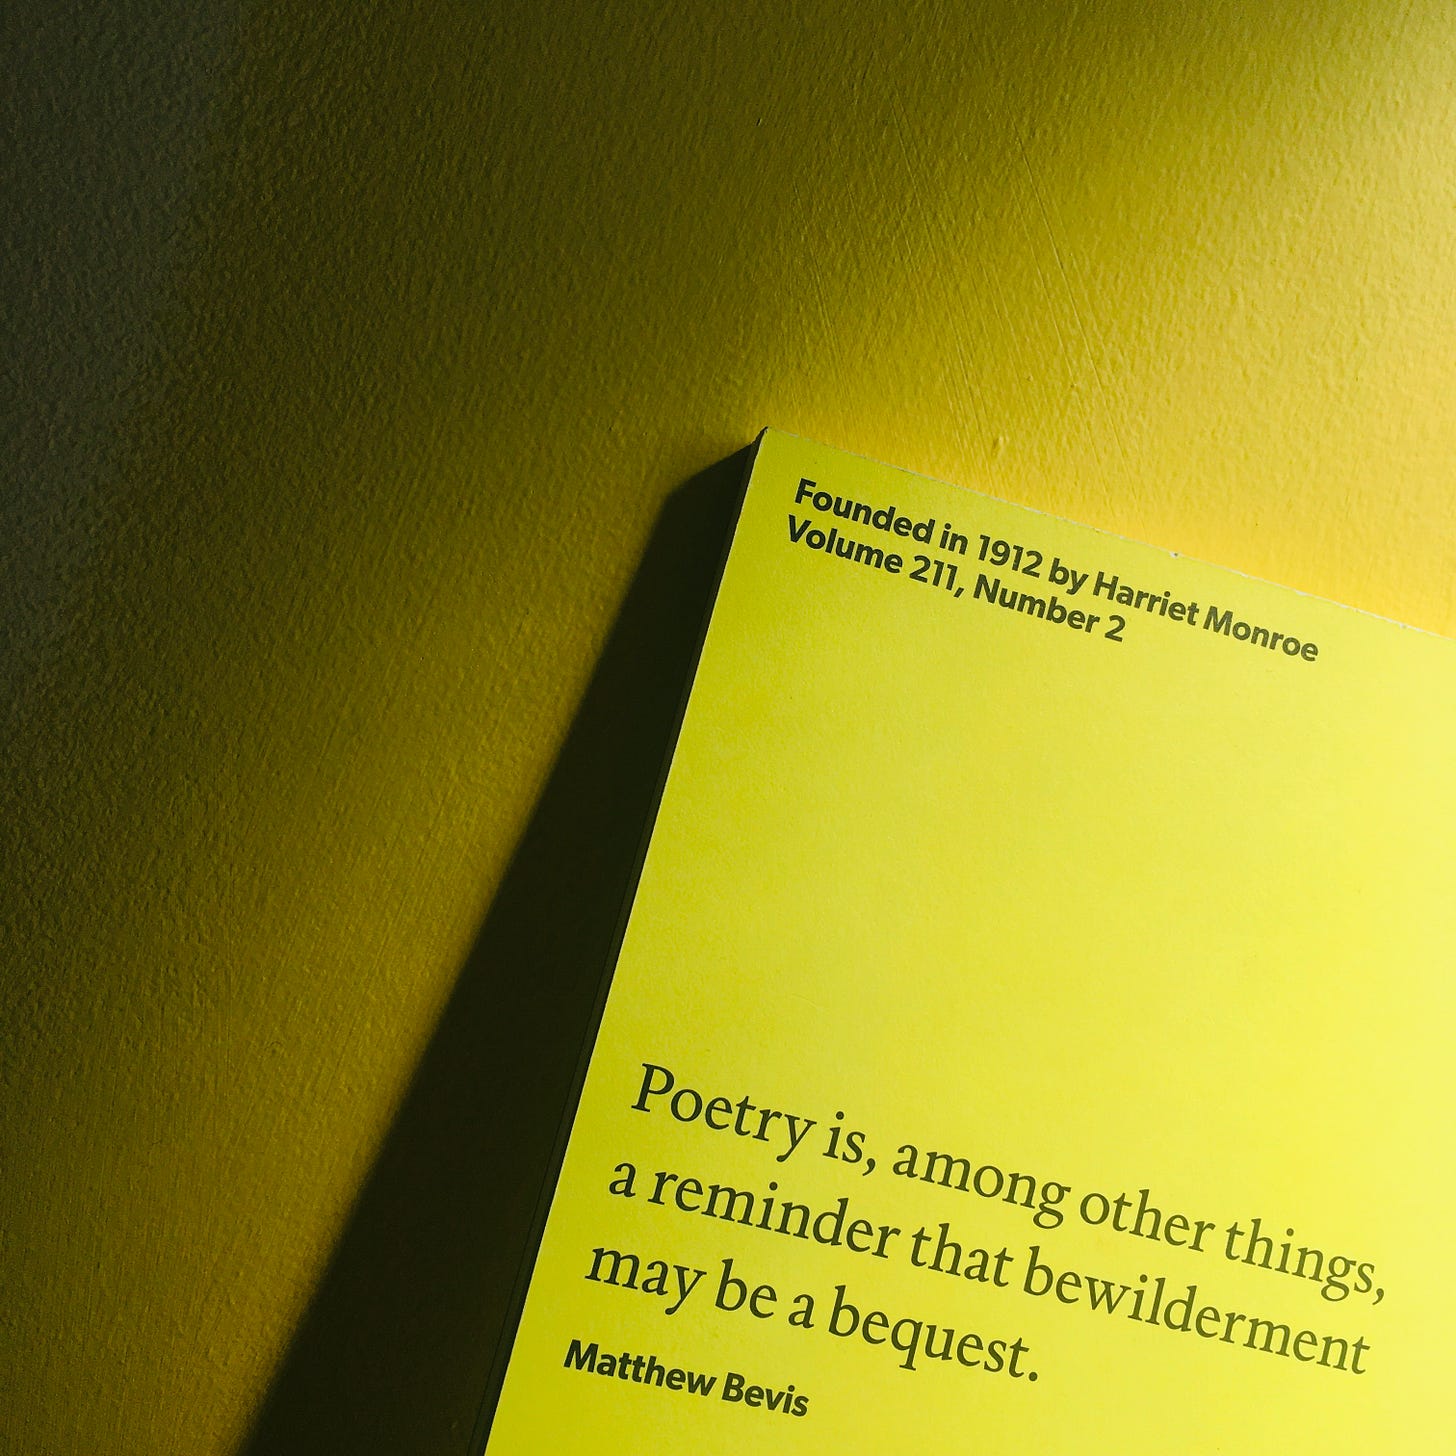 'Poetry is, among other things, a reminder that bewilderment may be a bequest' (Matthew Bevis)